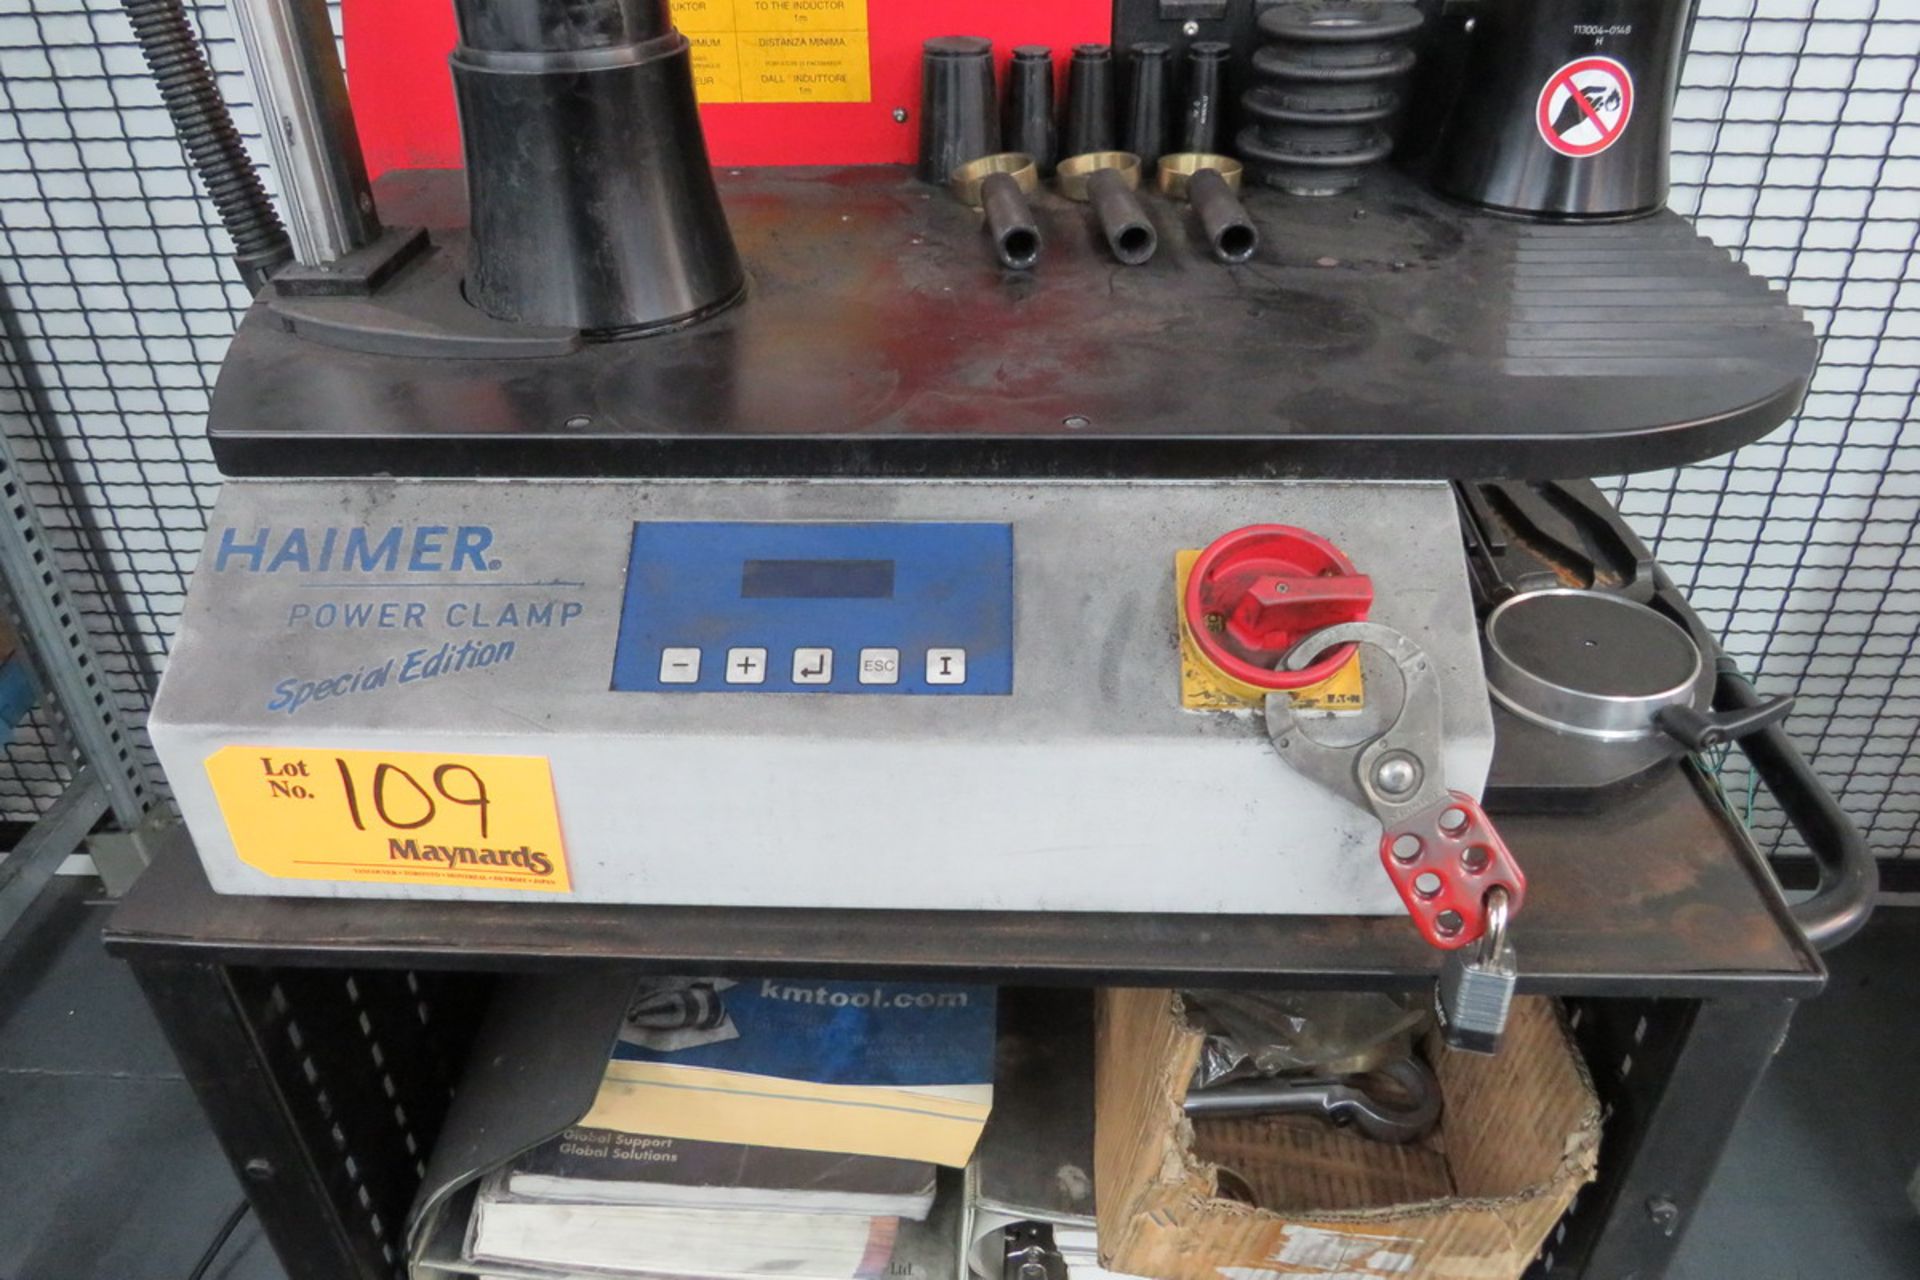 2013 Haimer Power Clamp Special Edition Shrink Fit Machine - Image 5 of 7